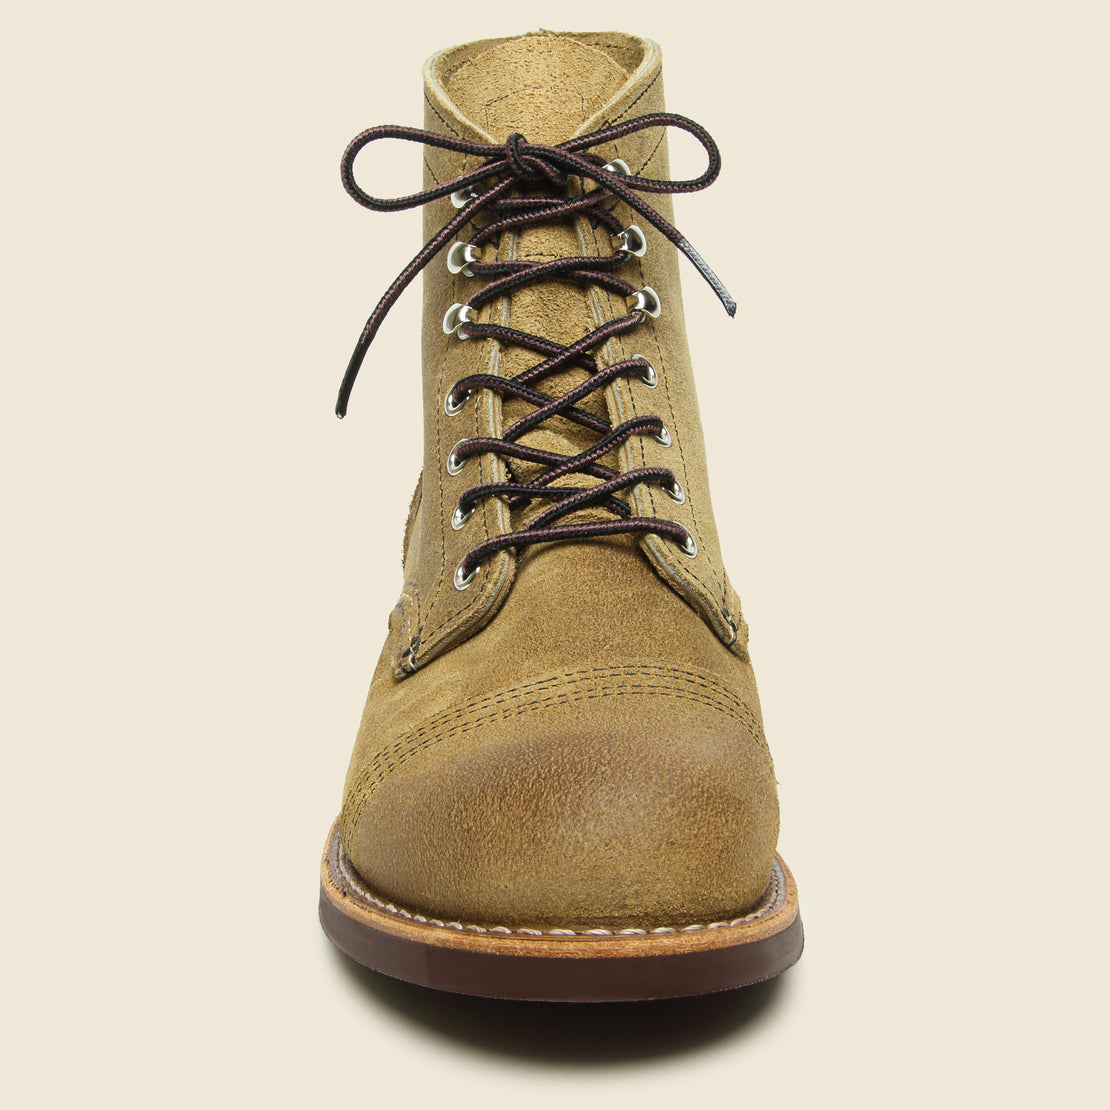 Iron Ranger No. 8083 - Hawthorne - Mini-Lug Sole - Red Wing - STAG Provisions - Shoes - Boots / Chukkas